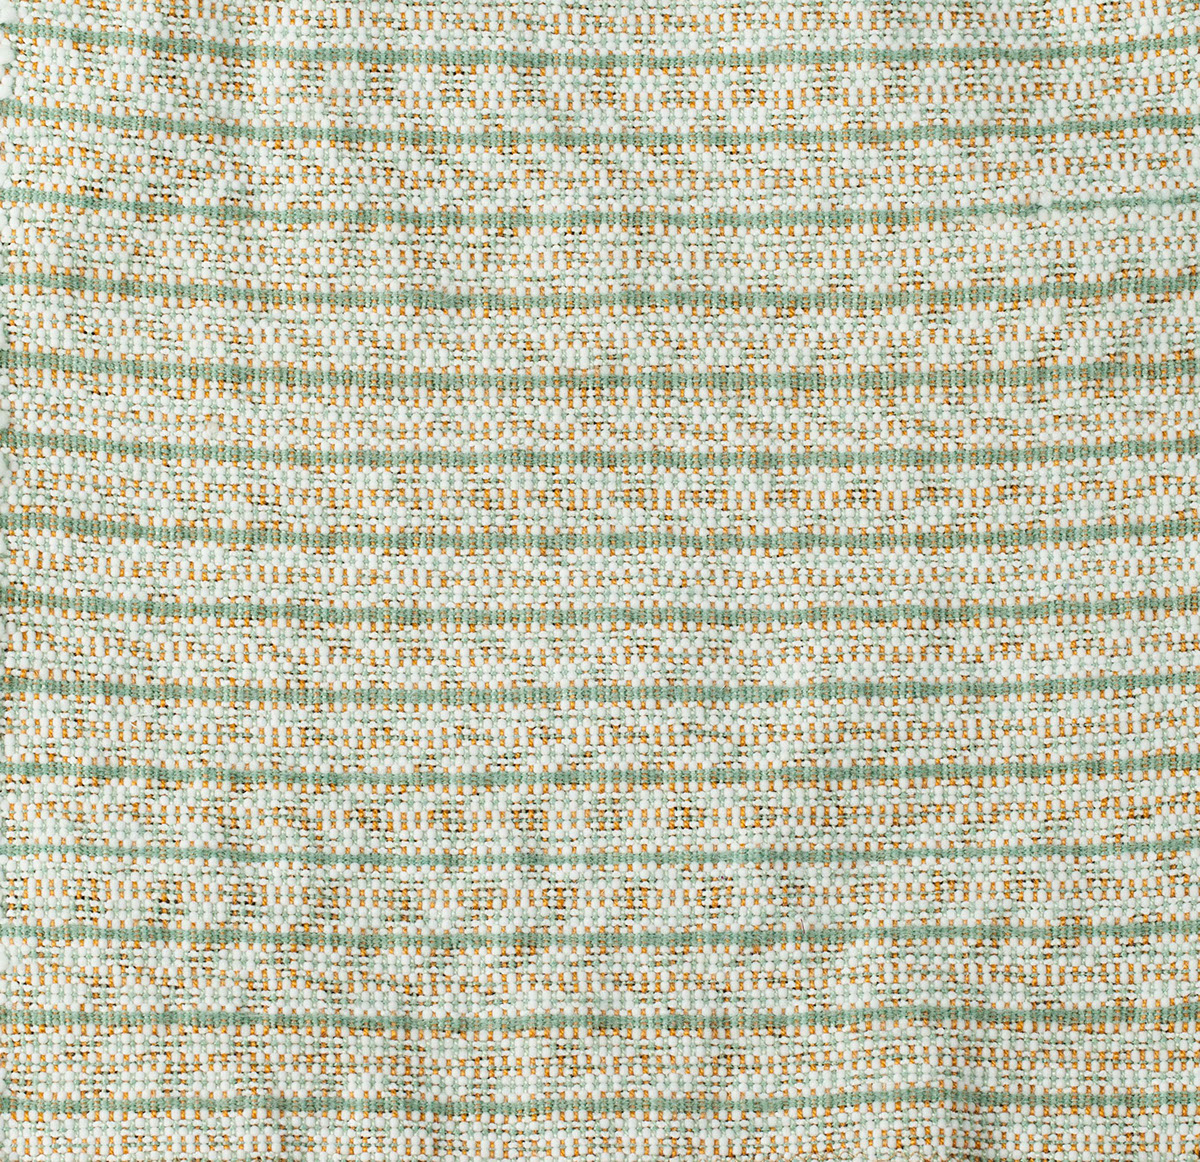 weaving Textiles fabric pattern structure Woven hand woven repeat